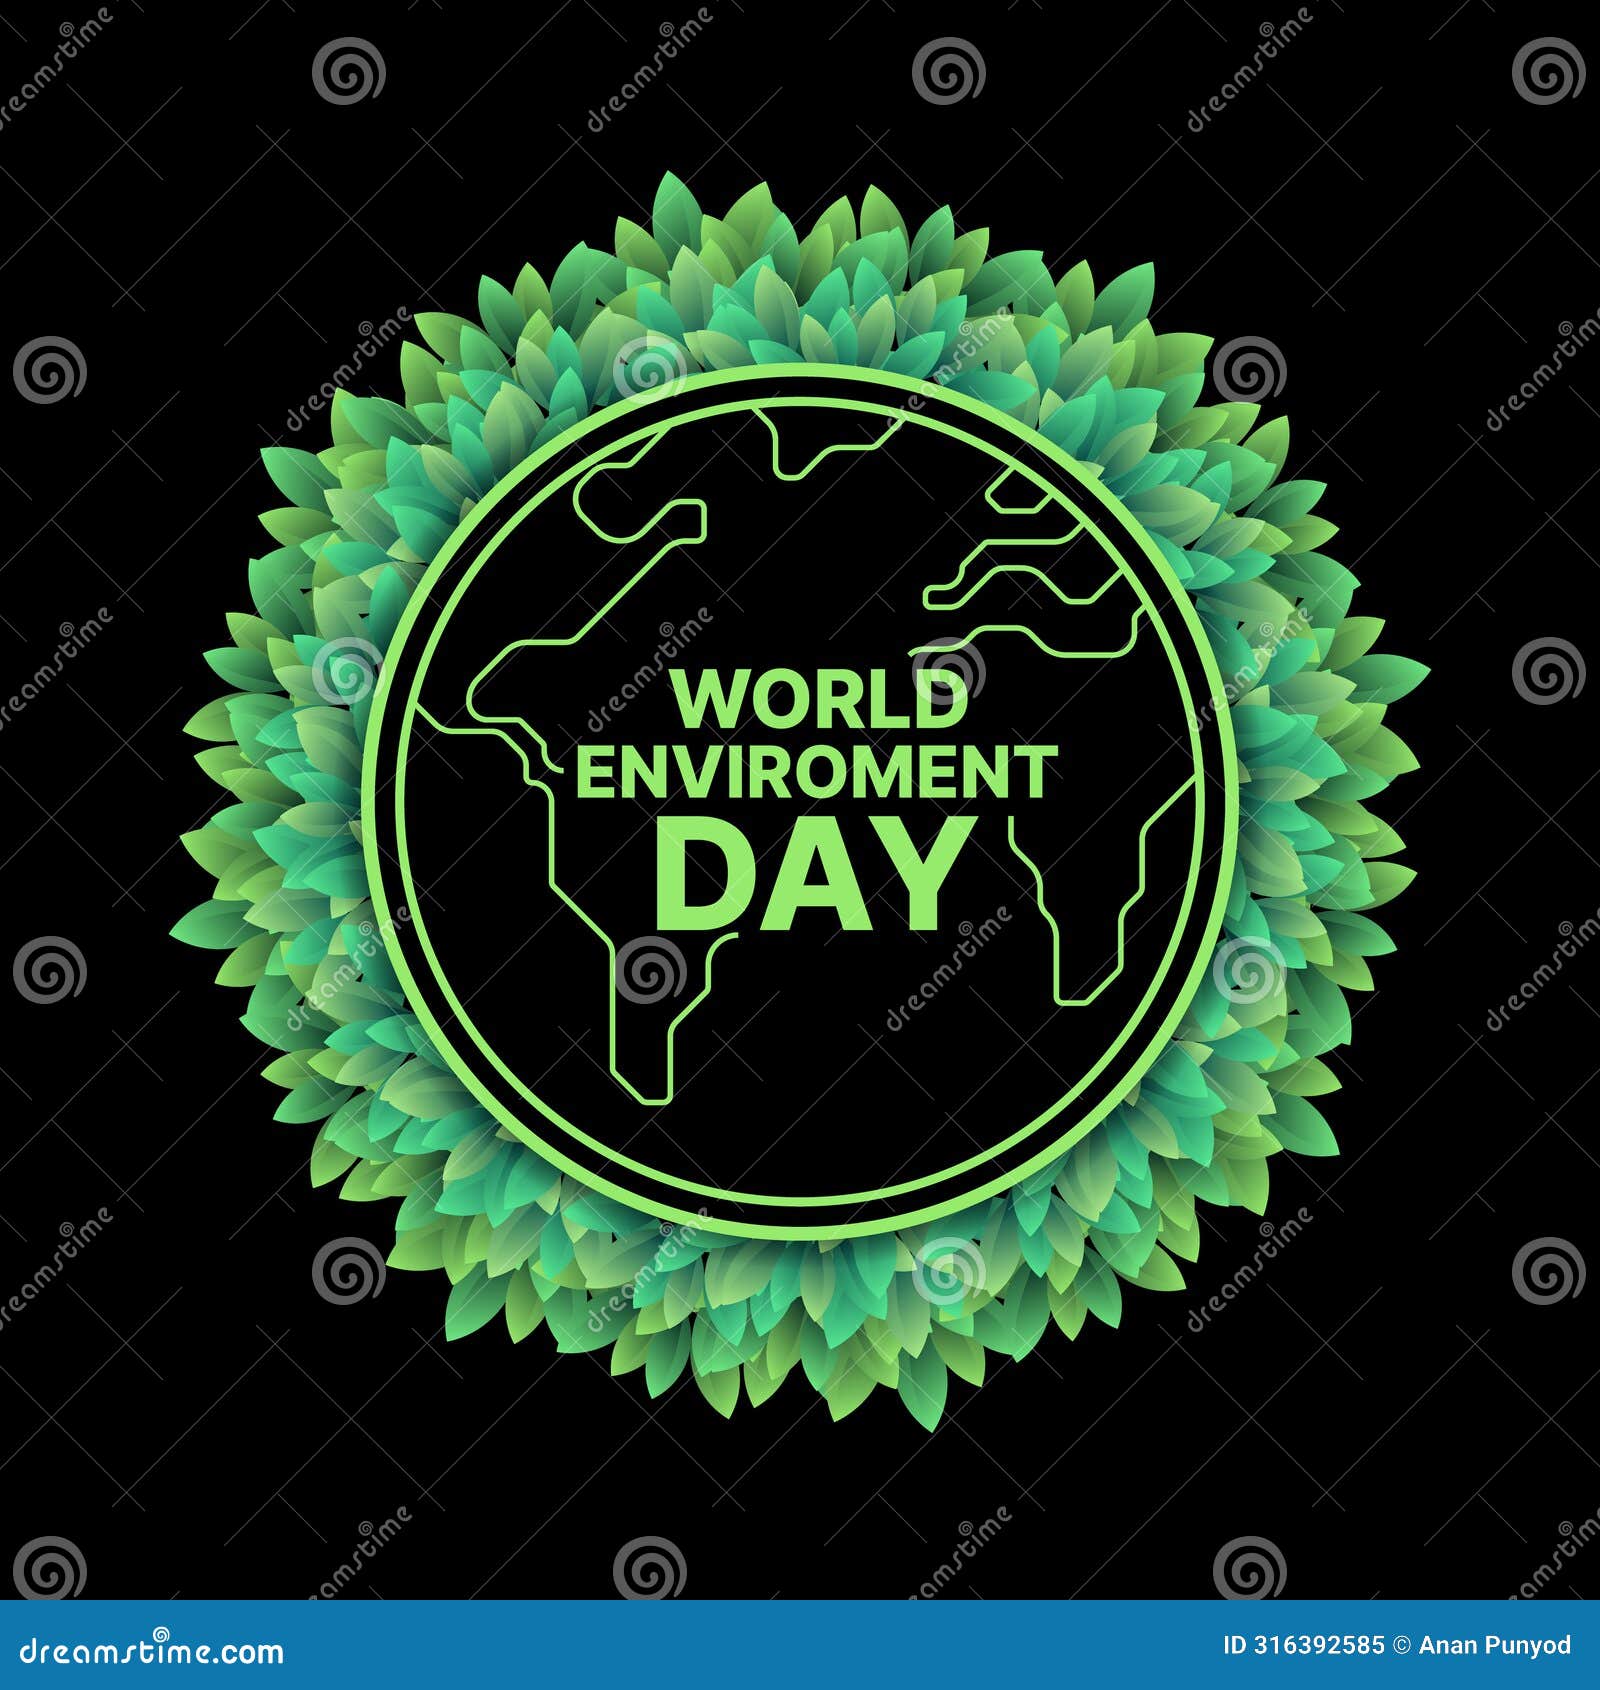 world enviroment day - green text on green line globe world sign in circle frame with leaf texture around on black background